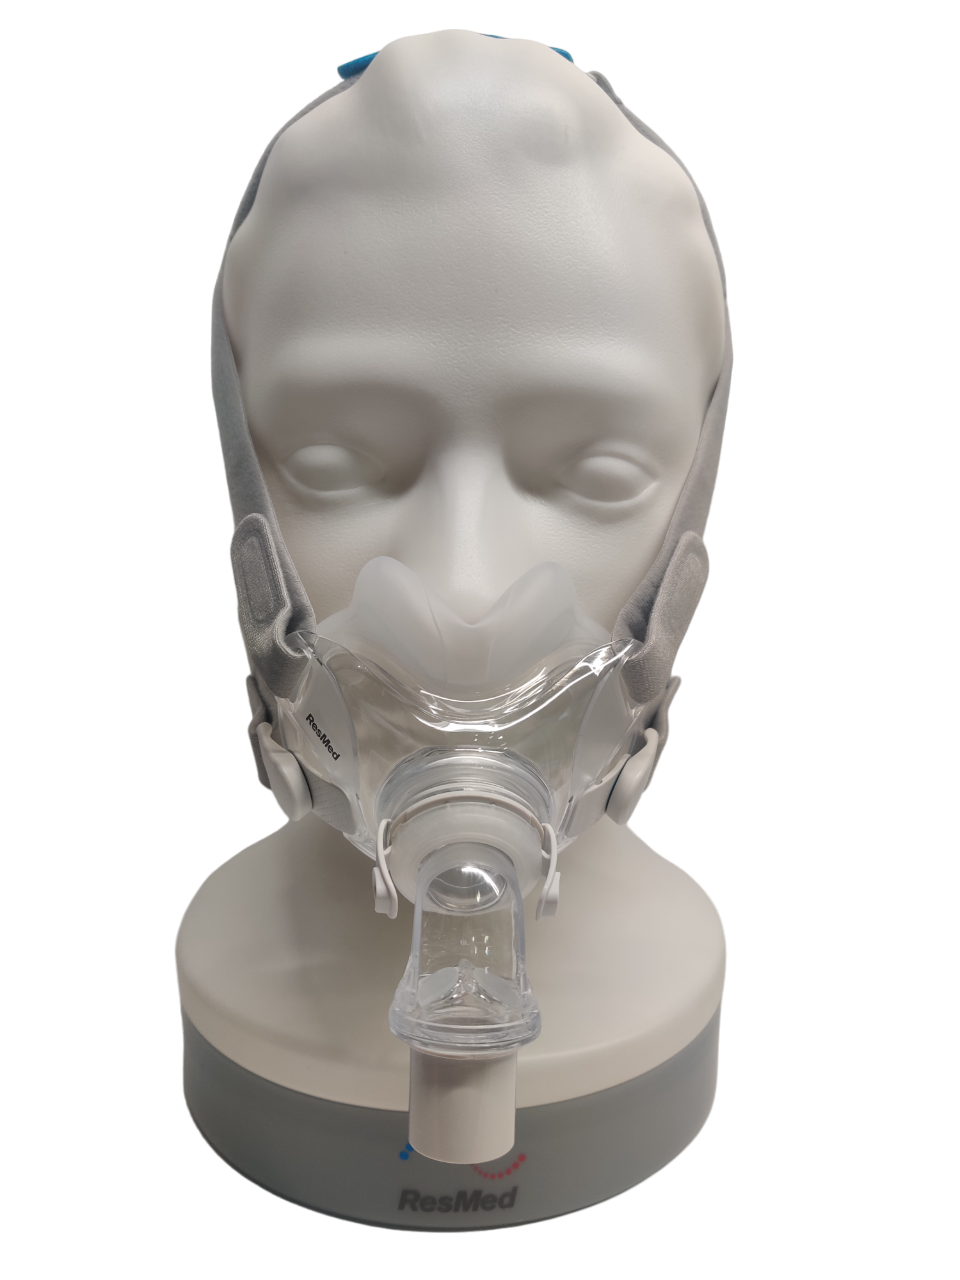 ResMed AirFit F30 Full Face CPAP Mask with Headgear - No Insurance Medical Supplies